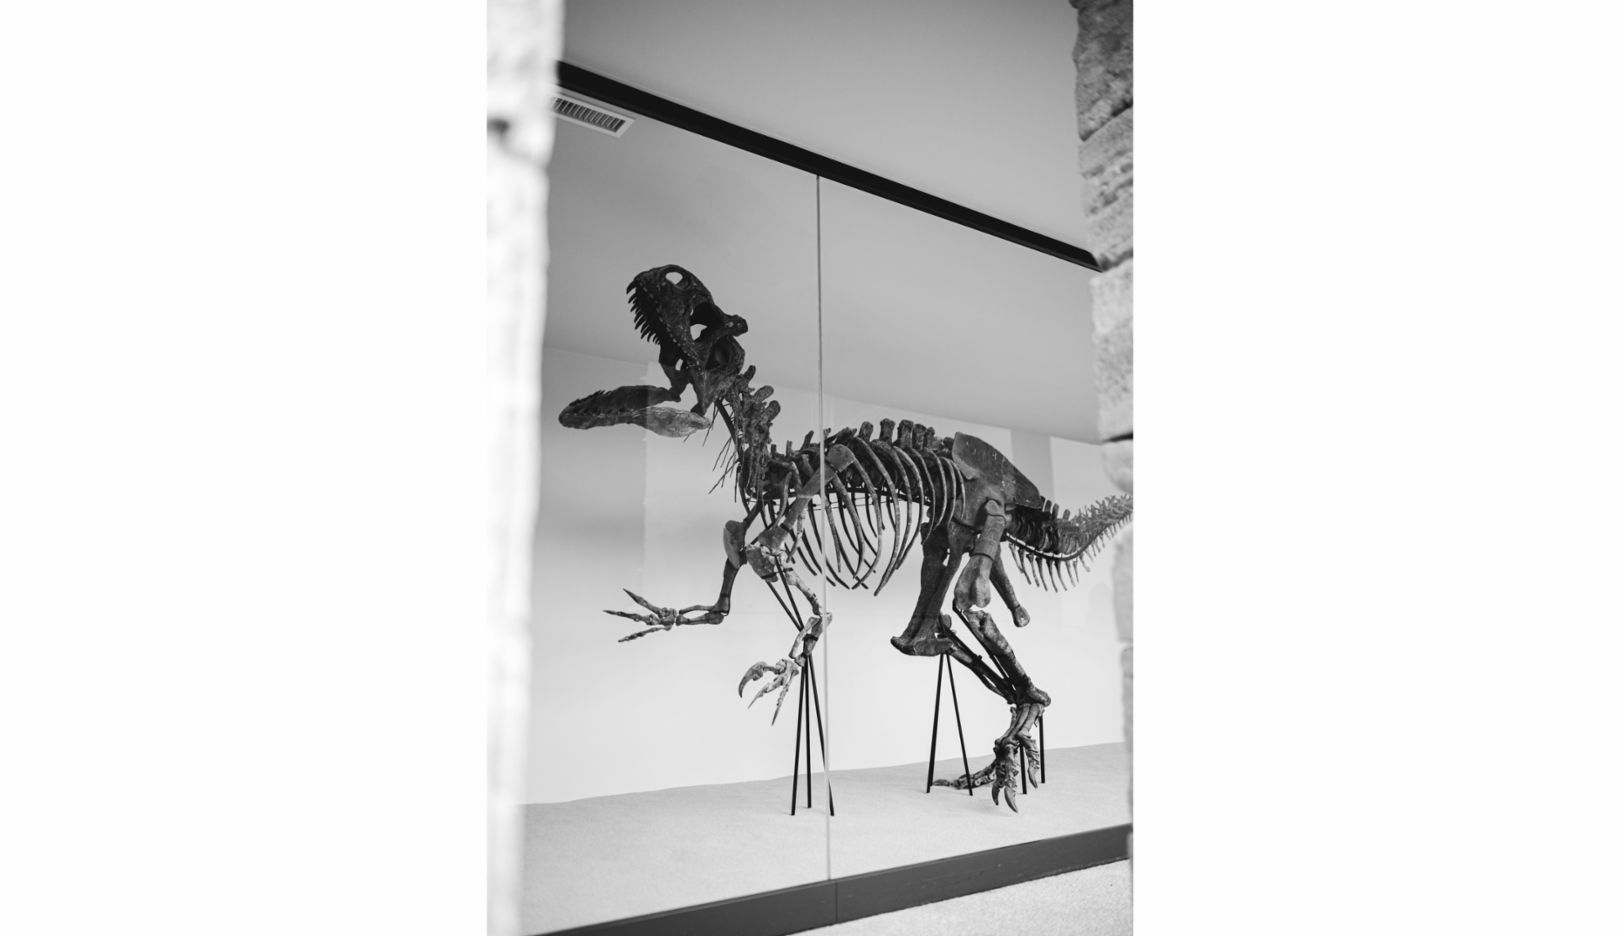 The original skeleton of a dinosaur is also on display at the gardens.